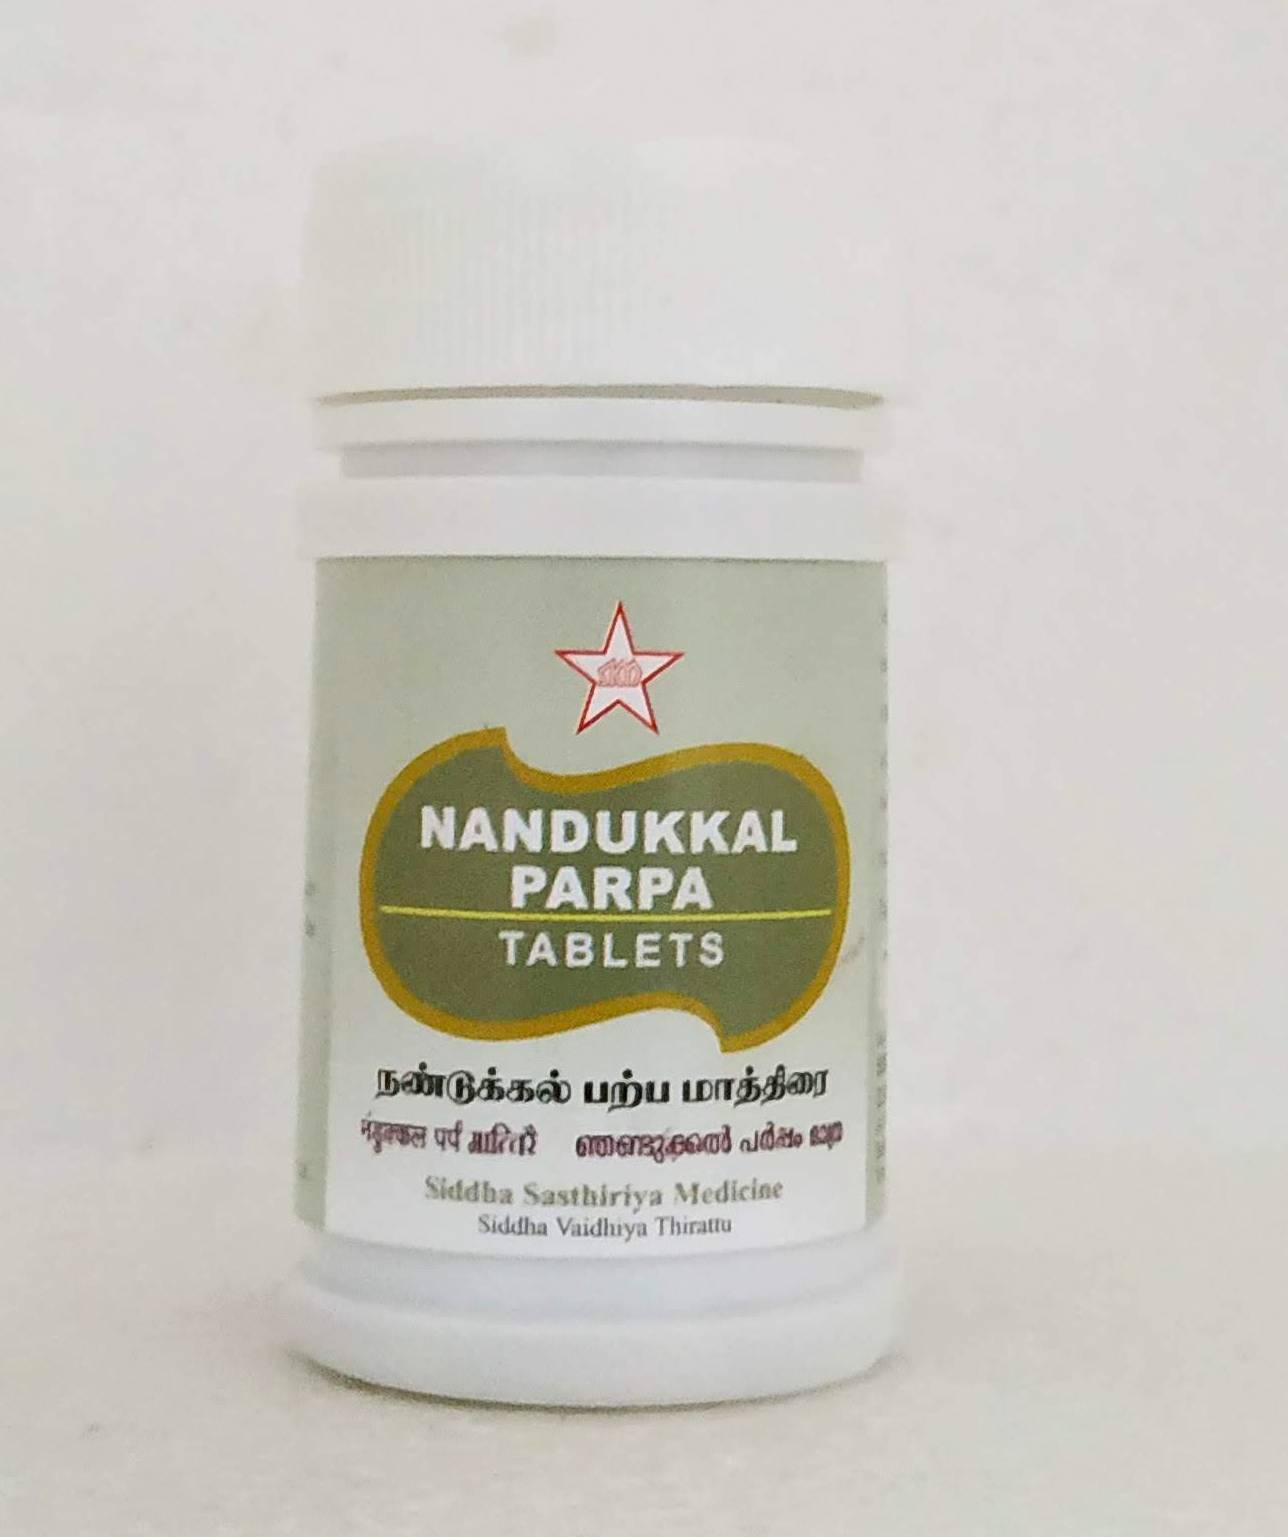 Shop Nandukkal parpa tablets - 100Tablets at price 94.00 from SKM Online - Ayush Care